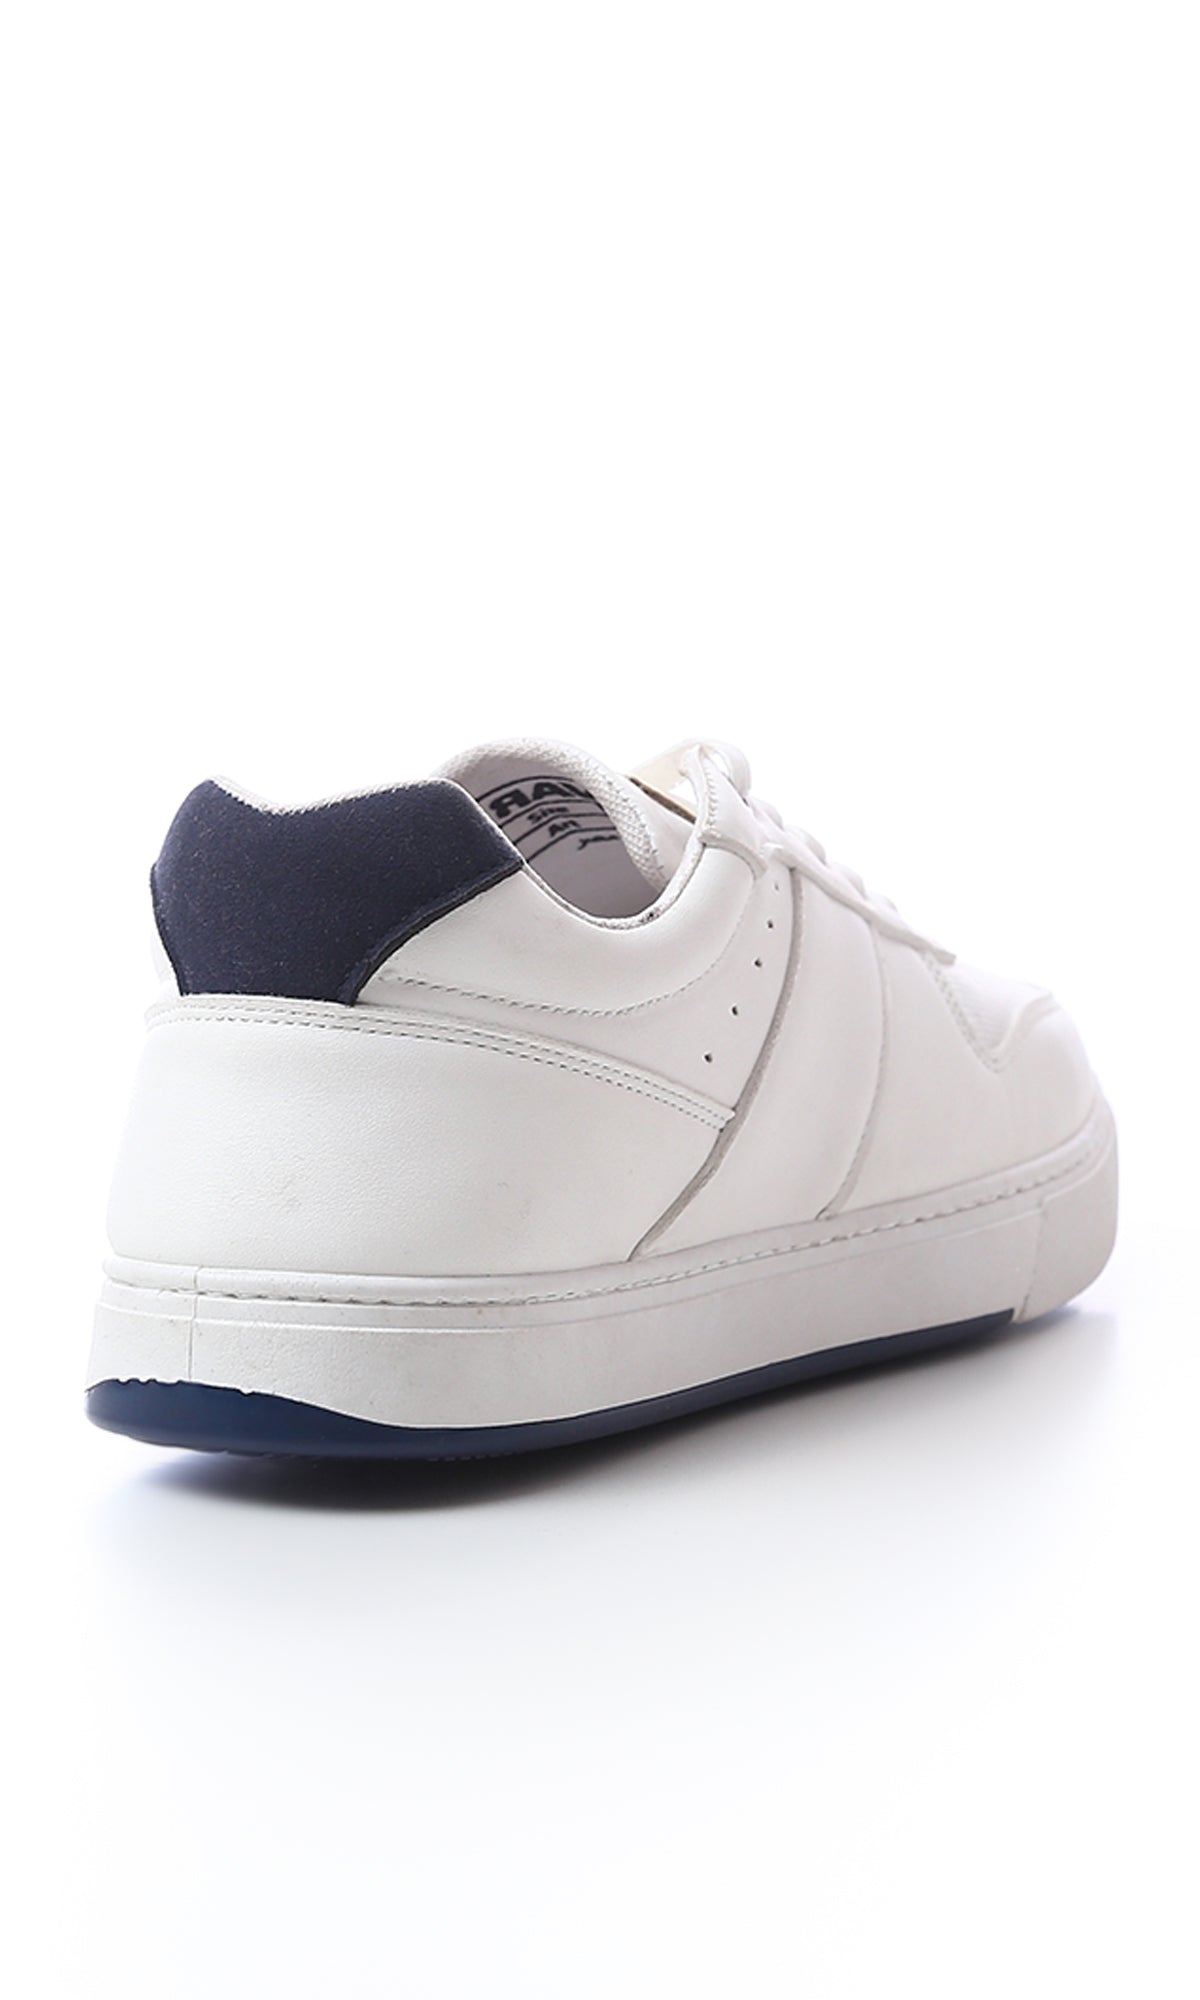 O171182 Lace Up White & Navy Blue Casual Shoes